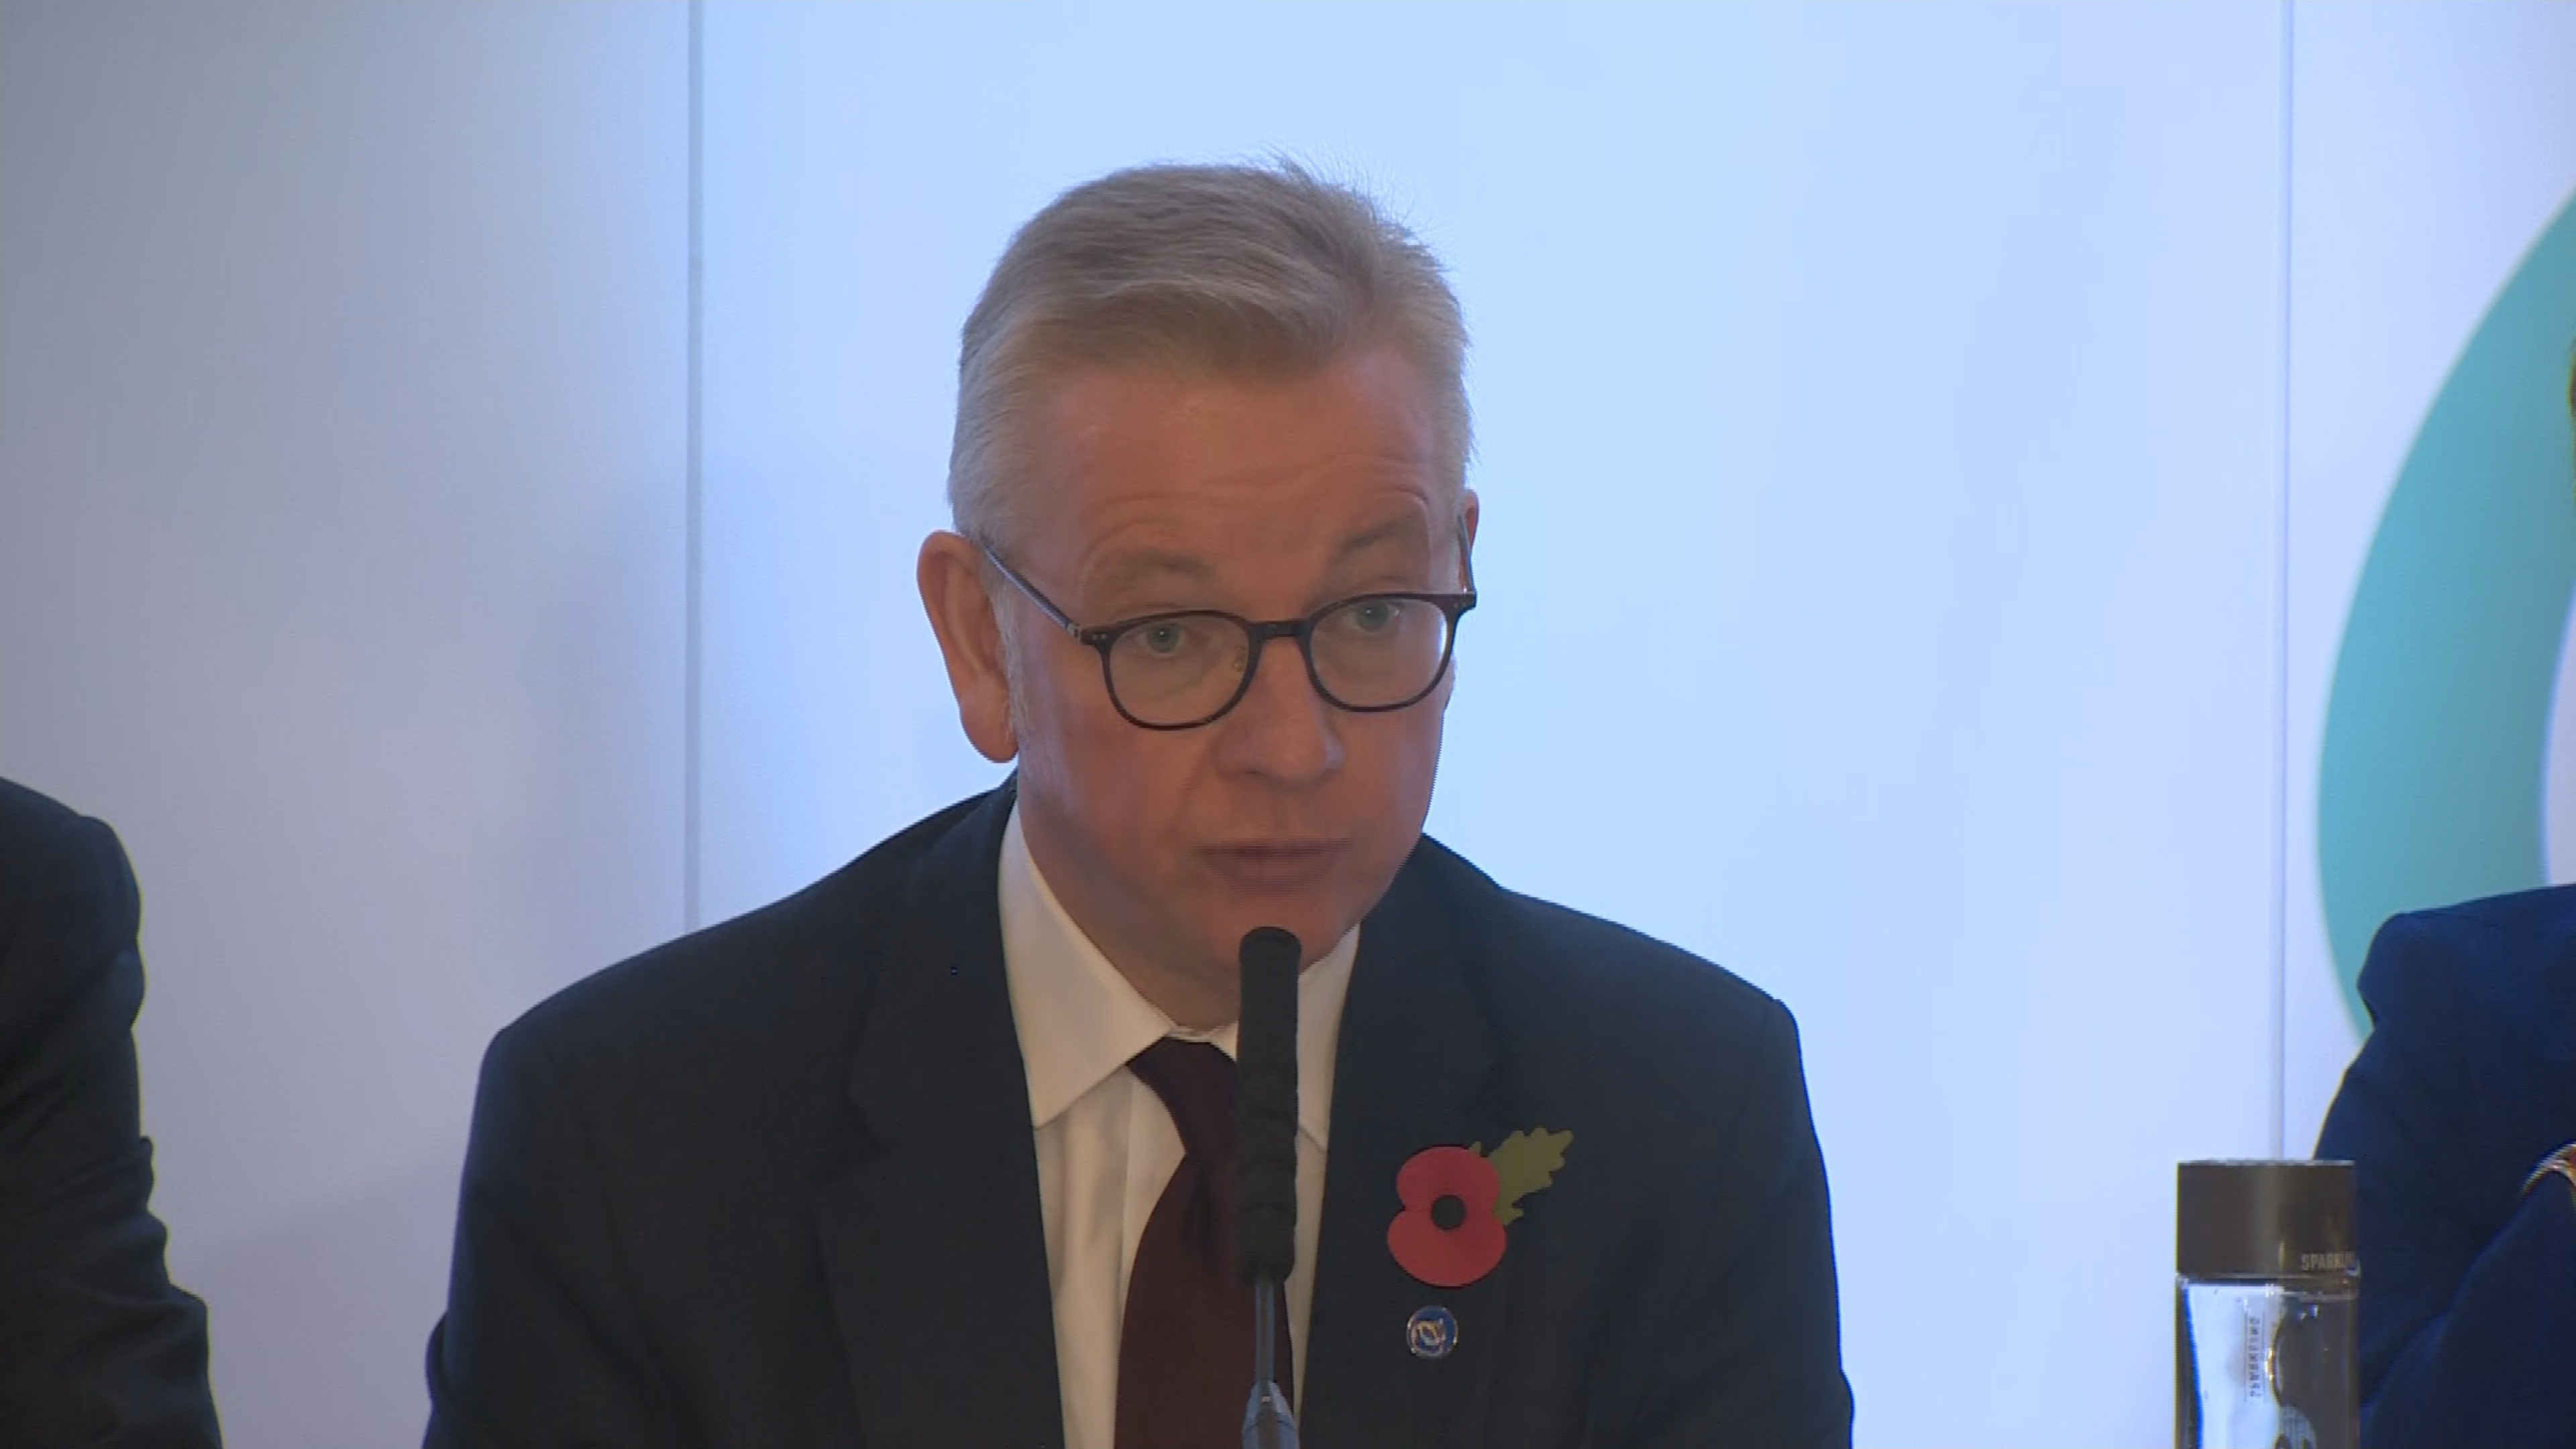 Michael Gove sat next to Nicola Sturgeon at the press conference. 